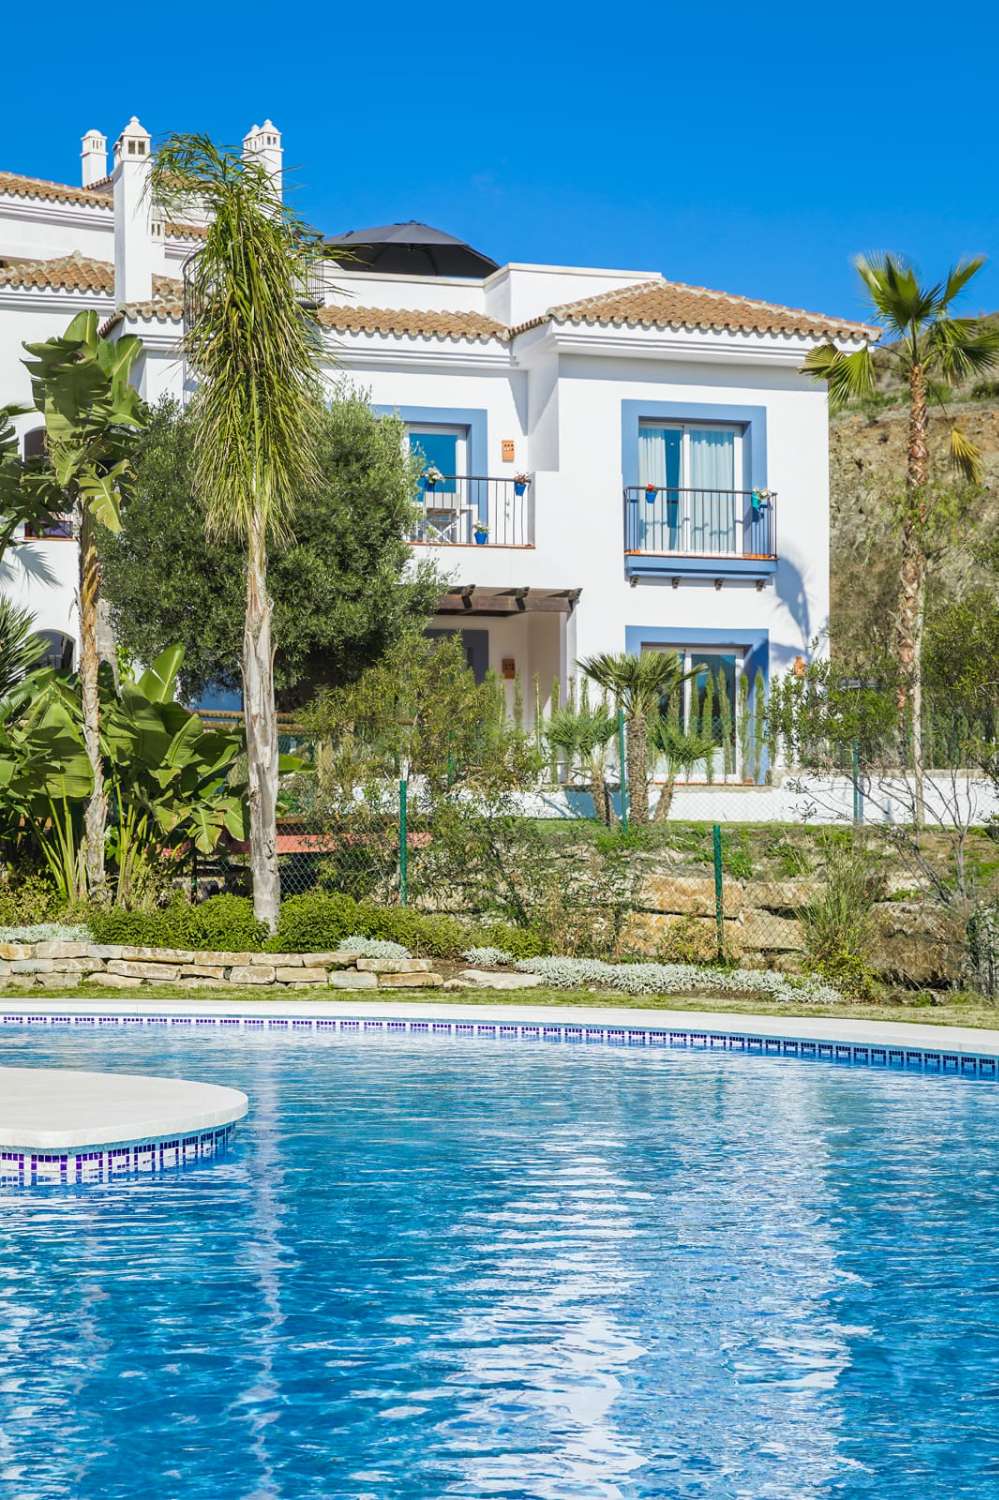 NEW CONSTRUCTION OPPORTUNITY 10 MINUTES FROM MARBELLA!!